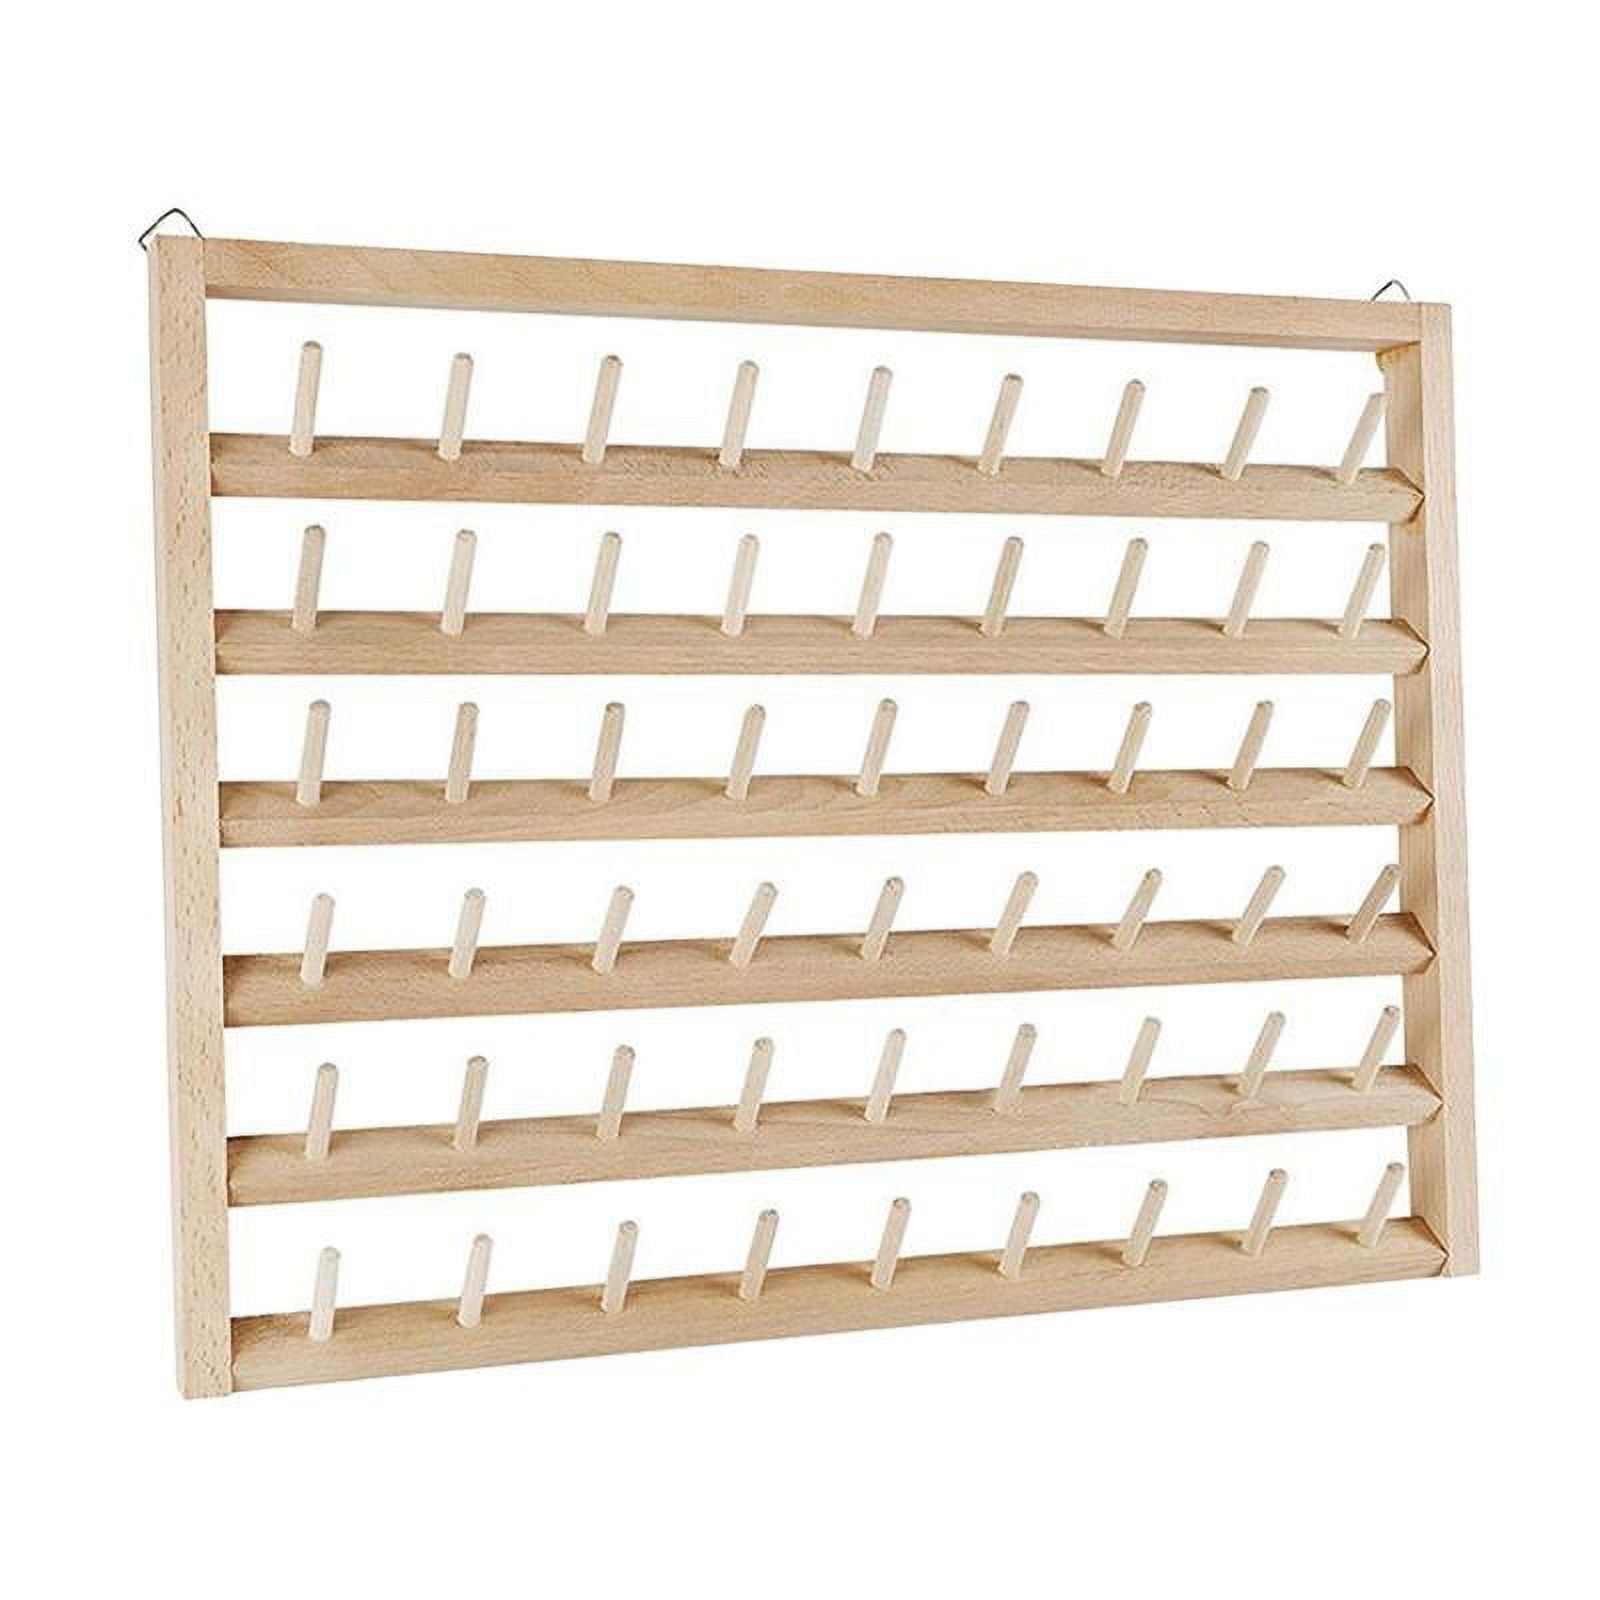 4 Pack Sewing & Embroidery Thread Rack Wall-Mounted Thread Holder